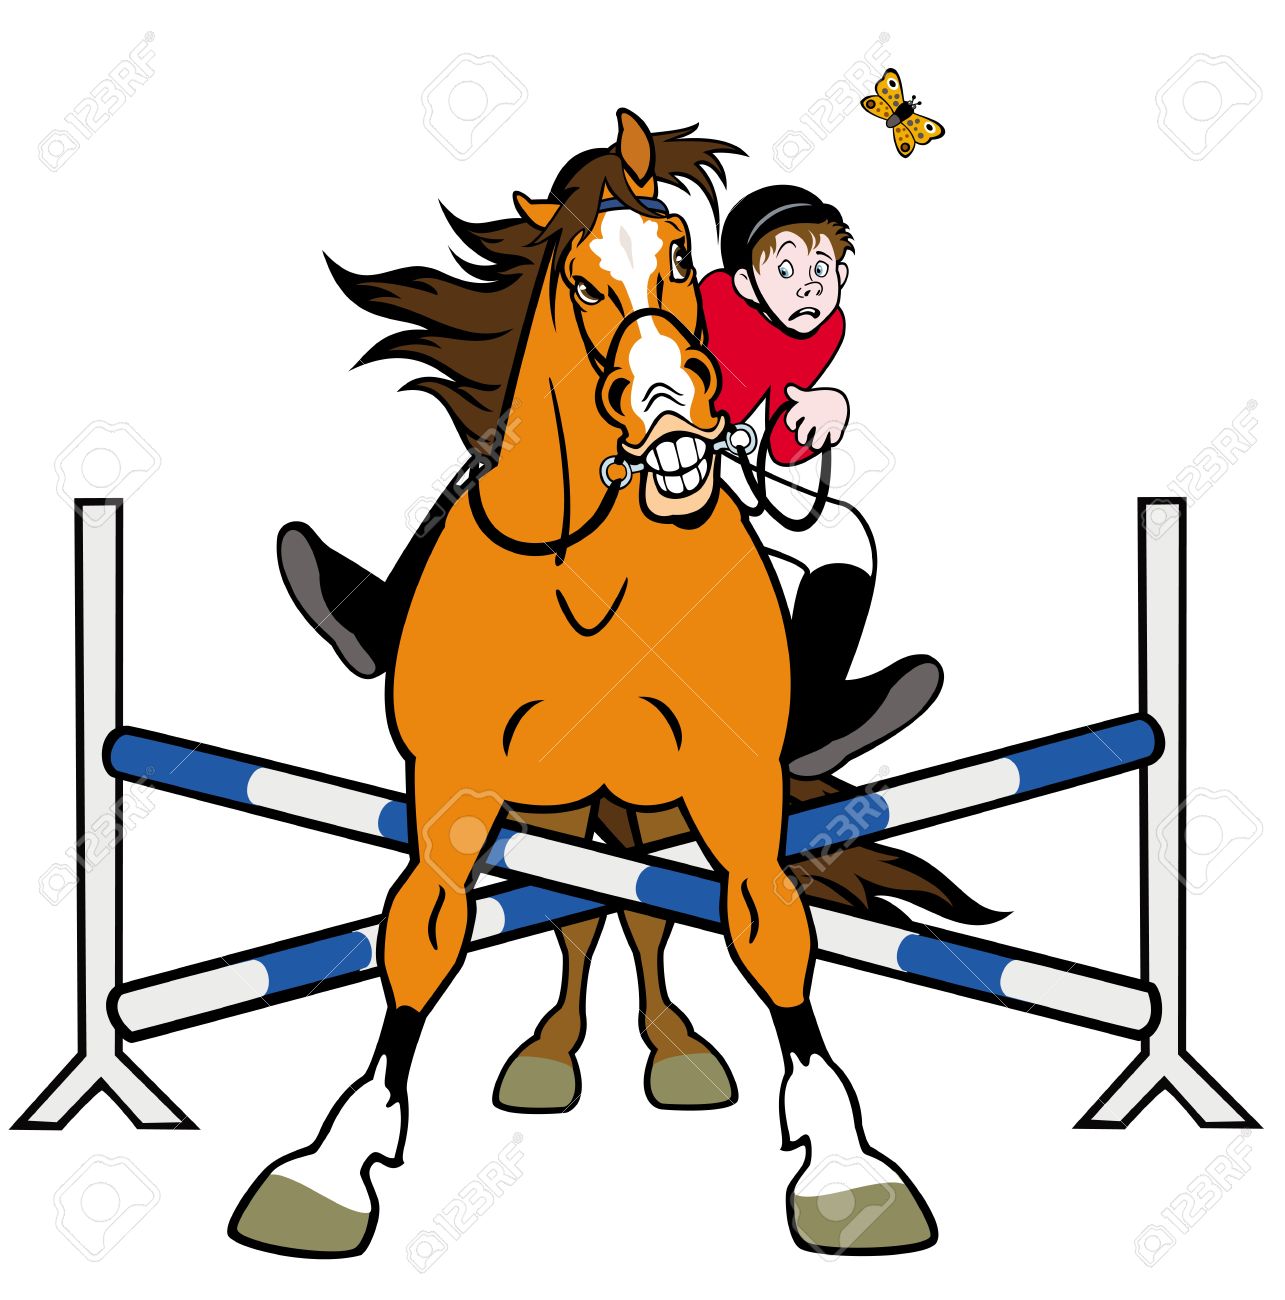 17223670-equestrian-sport-horse-rider-in-jumping-show-cartoon-illustration-isolated-on-white-background-Stock-Vector